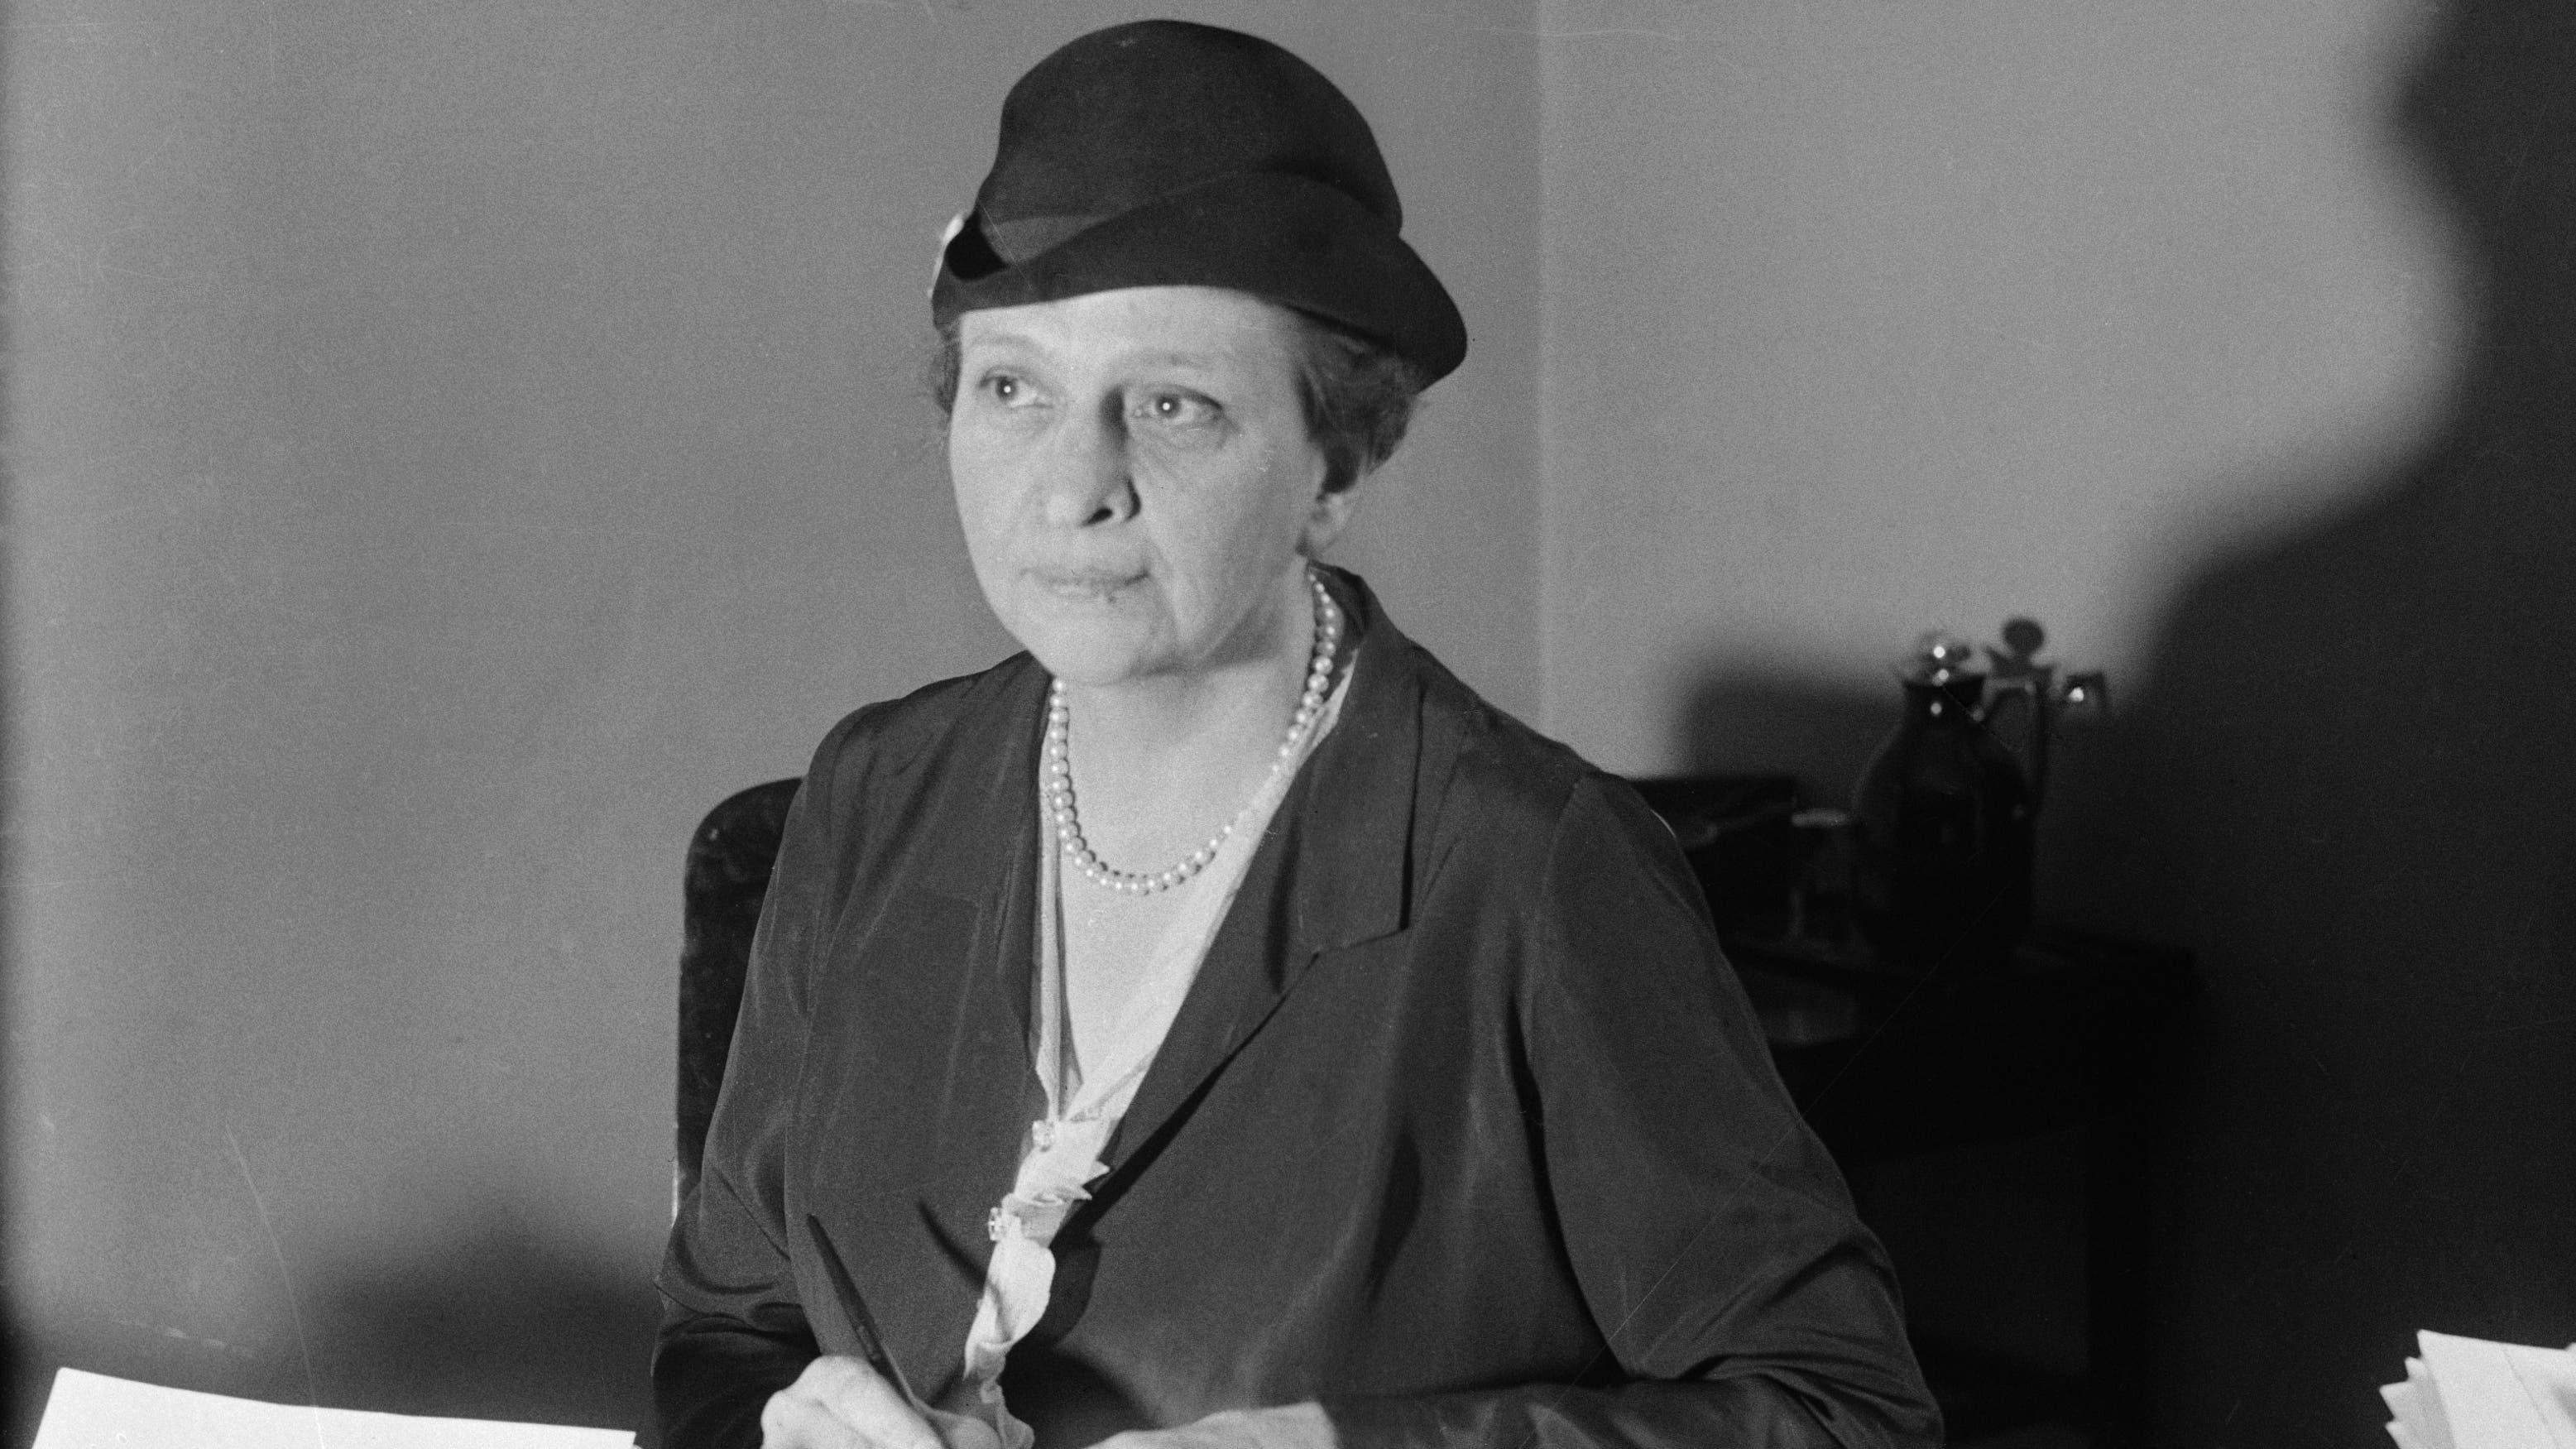 Frances Perkins, named by President Franklin D. Roosevelt as his Secretary of Labor. She was the first woman to hold a cabinet office in the United States.